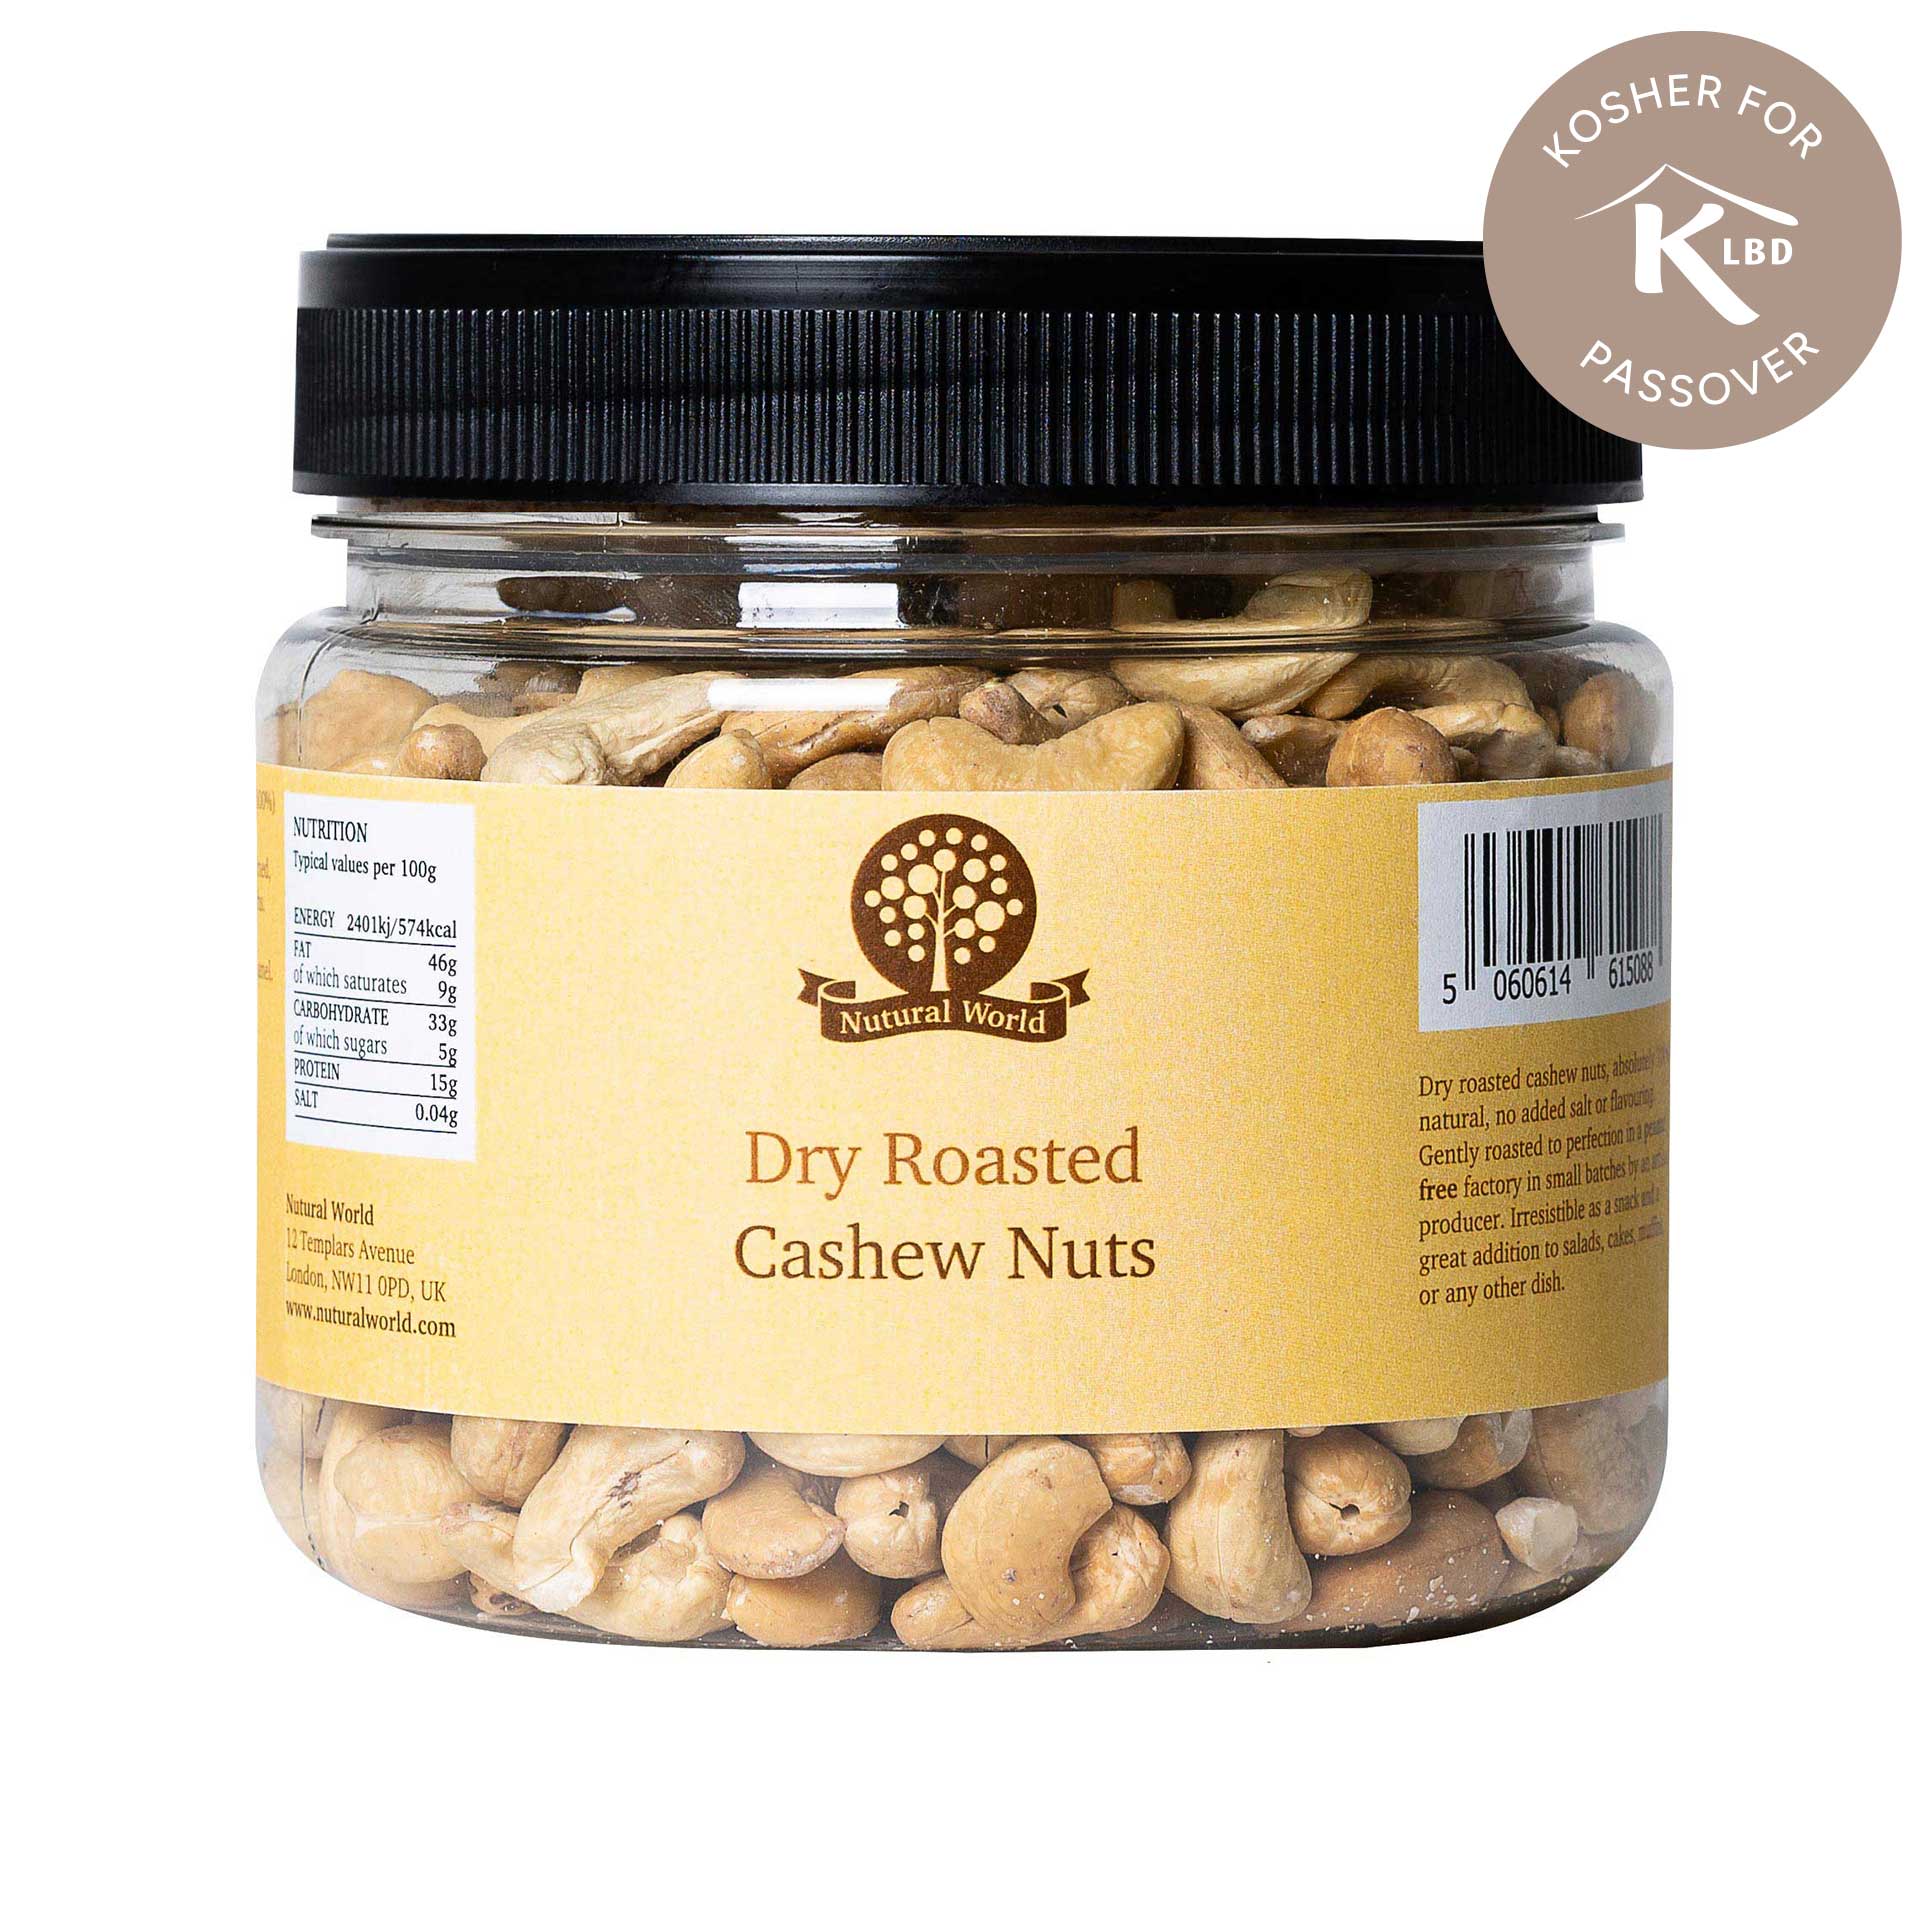 Dry Roasted Whole Cashews - Unsalted (500g) - Kosher for Passover